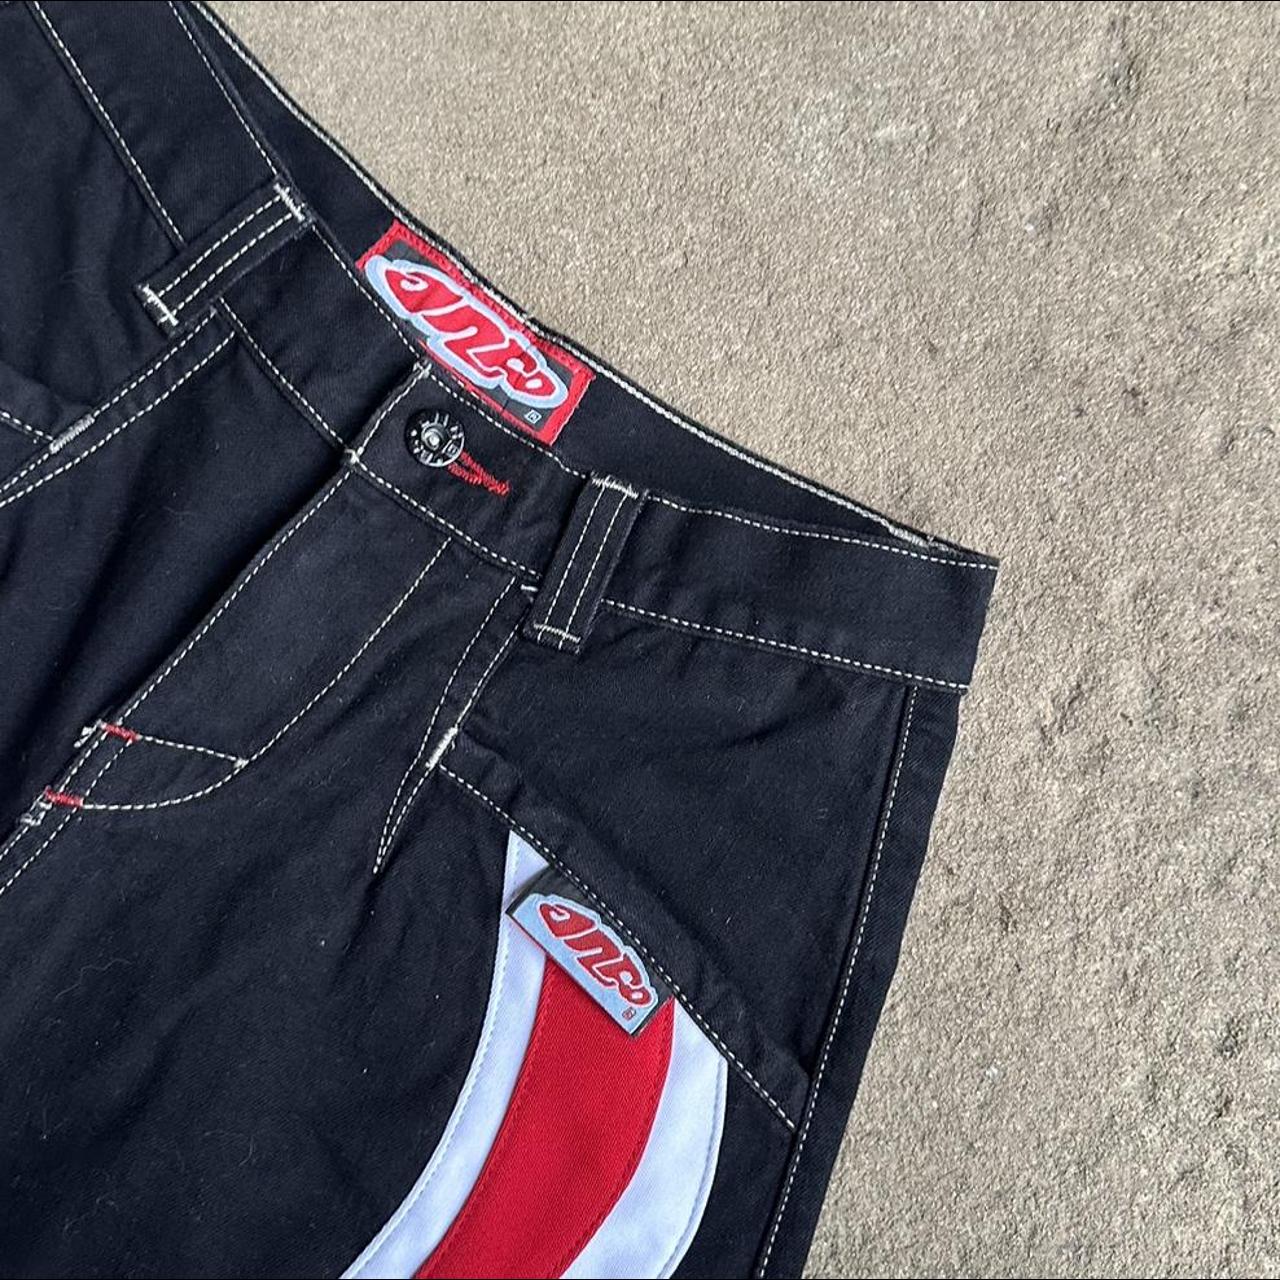 JNCO Women's Black and Red Jeans | Depop